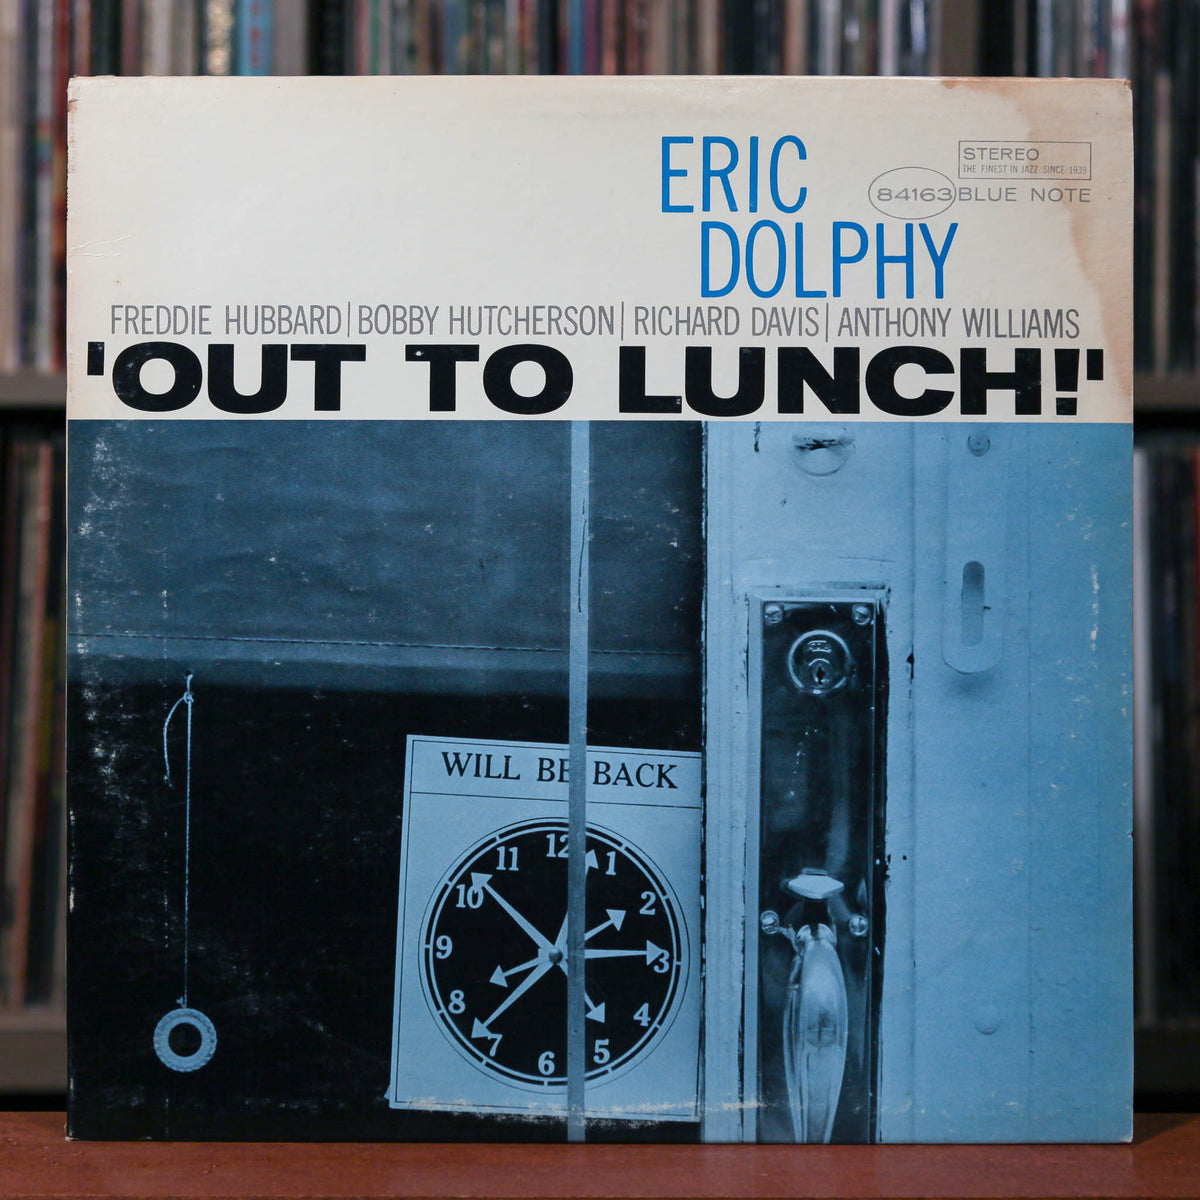 Eric Dolphy - Out To Lunch! - 1966 Blue Note, VG/VG+